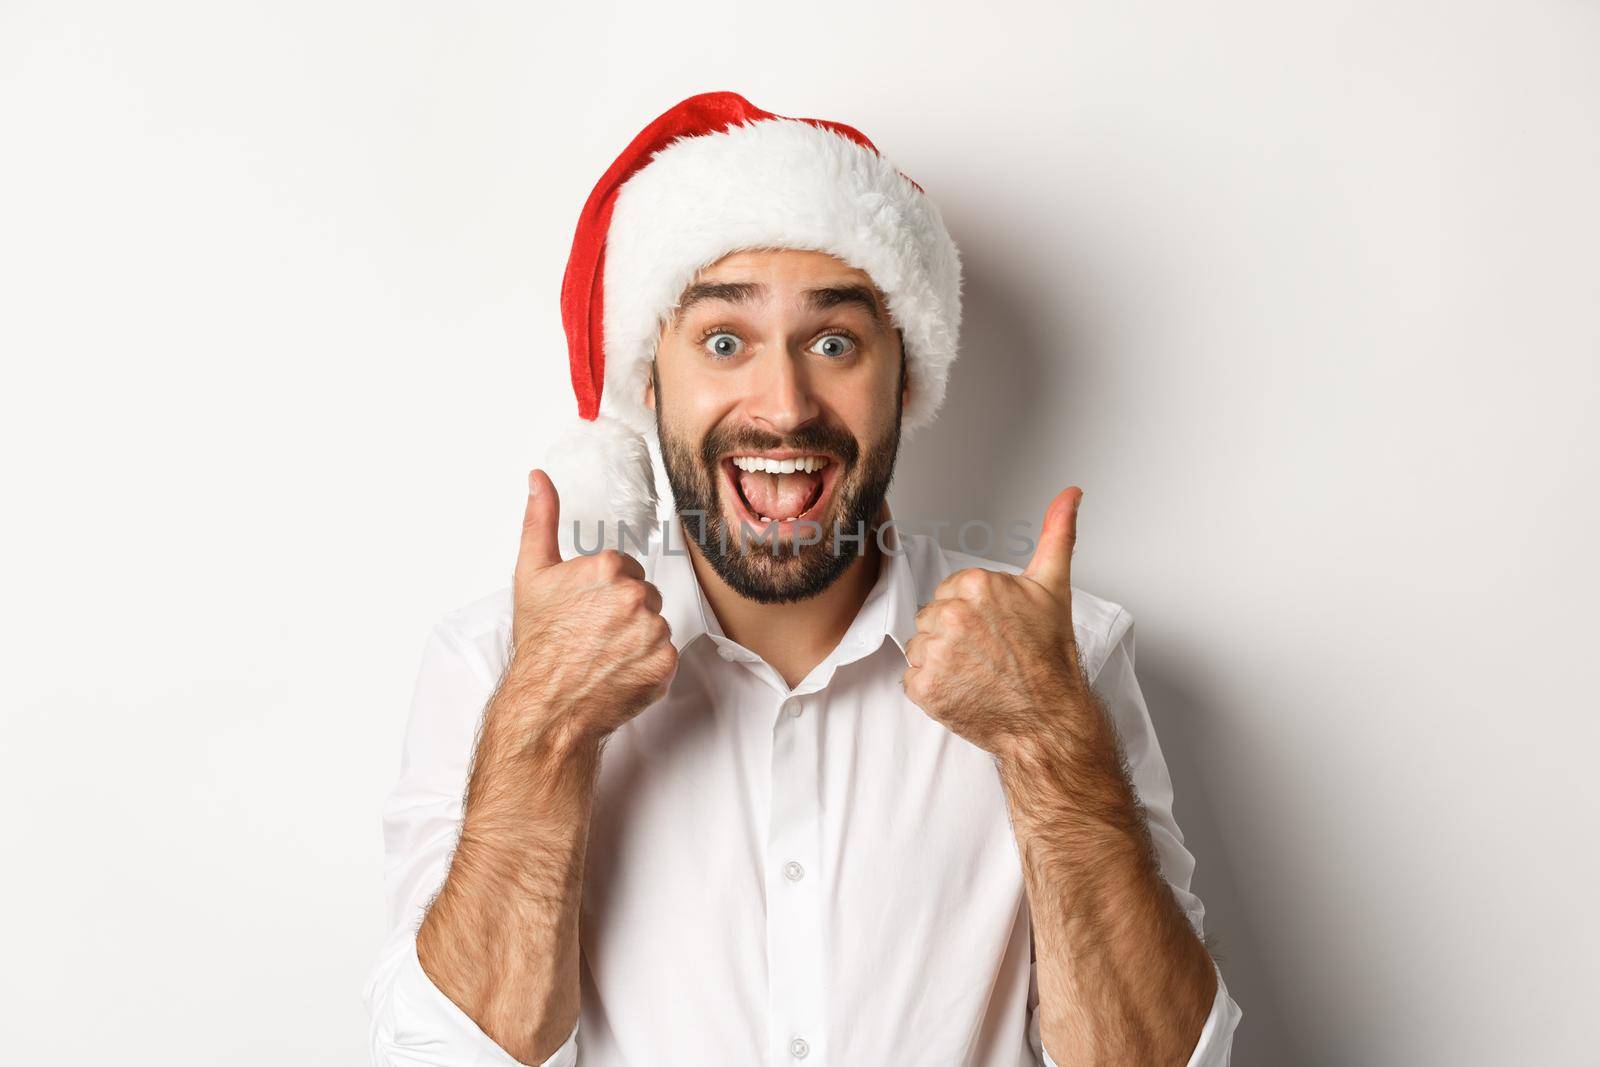 Party, winter holidays and celebration concept. Man enjoying christmas, wearing santa hat and showing thumb up with excited face, white background.